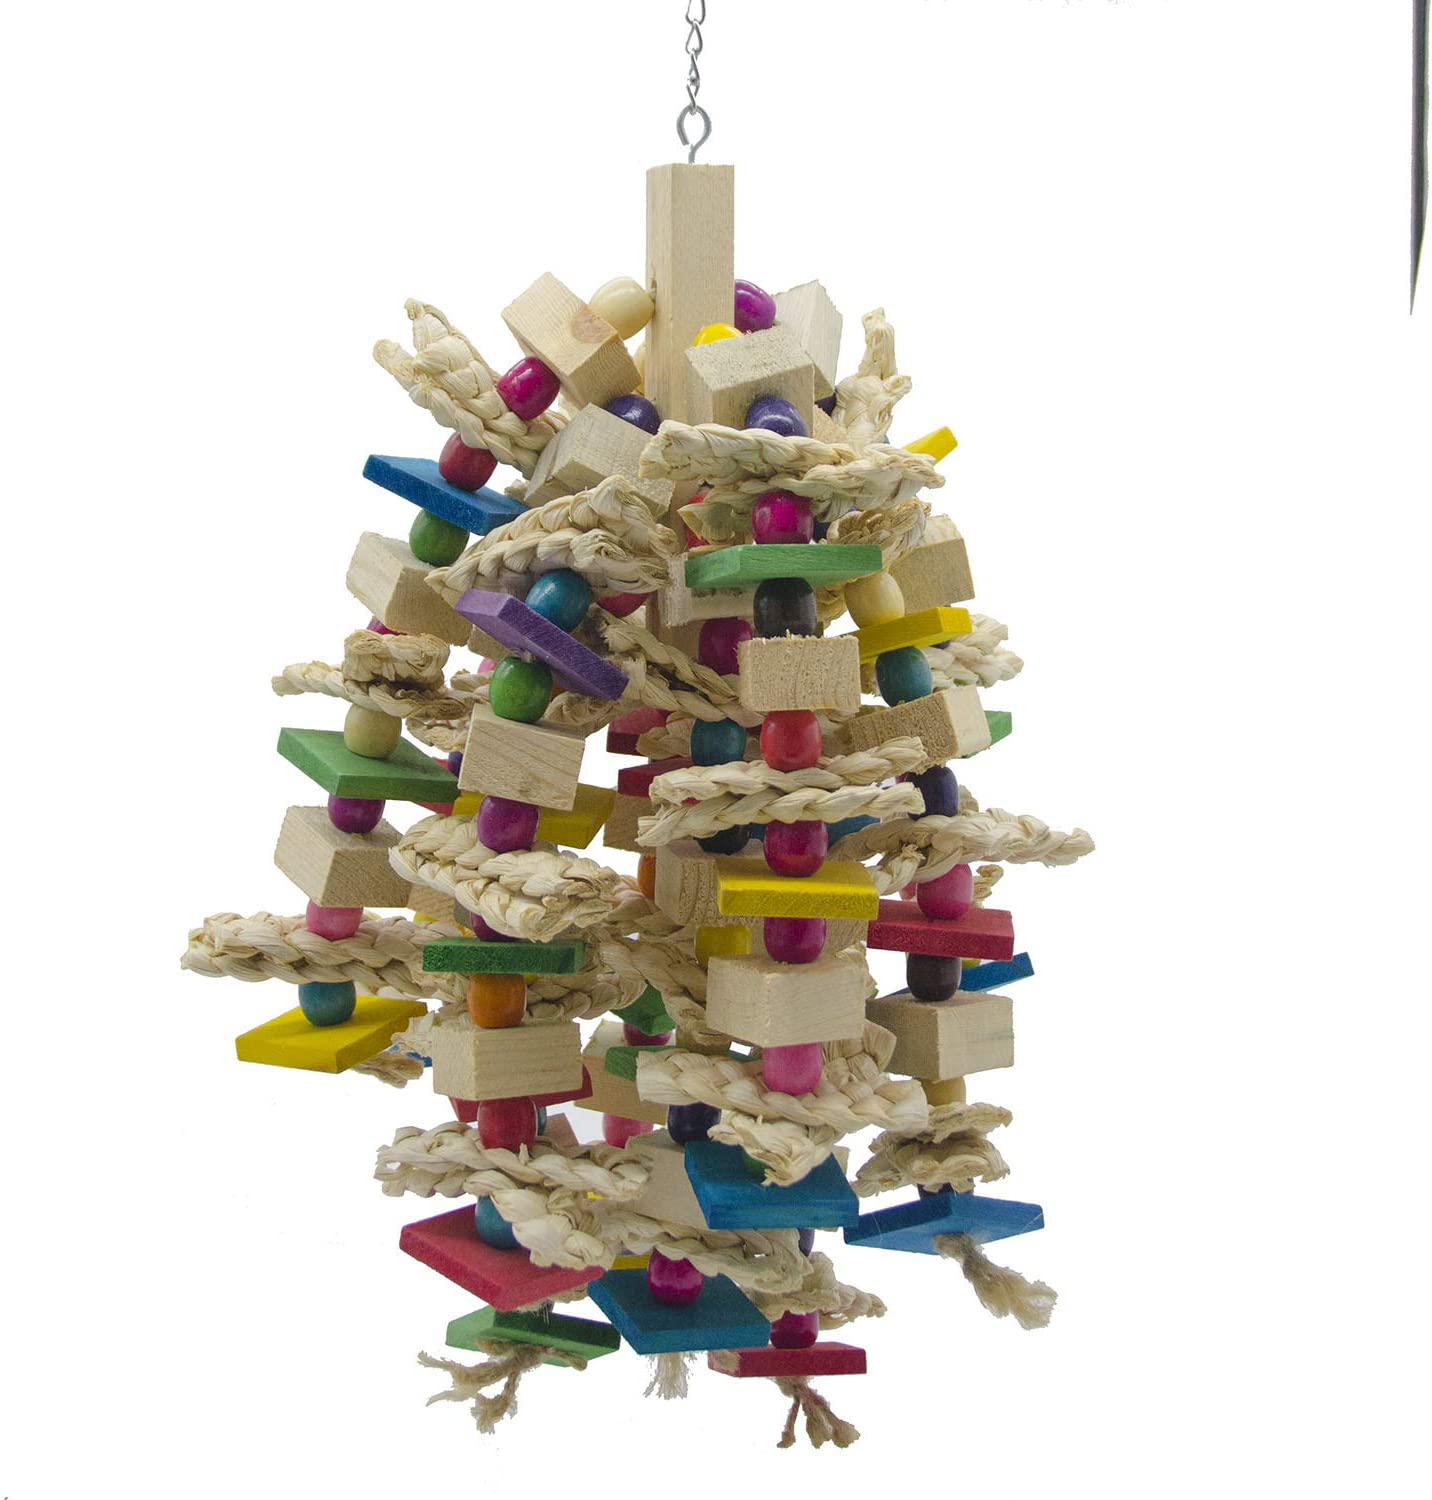 Ebaokuup Large Parrot Chewing Toy - Bird Parrot Blocks Knots Tearing Toy Bird Cage Bite Toy for African Grey, Macaws Cockatoos, and a Variety of Amazon Parrots Animals & Pet Supplies > Pet Supplies > Bird Supplies > Bird Toys EBaokuup   